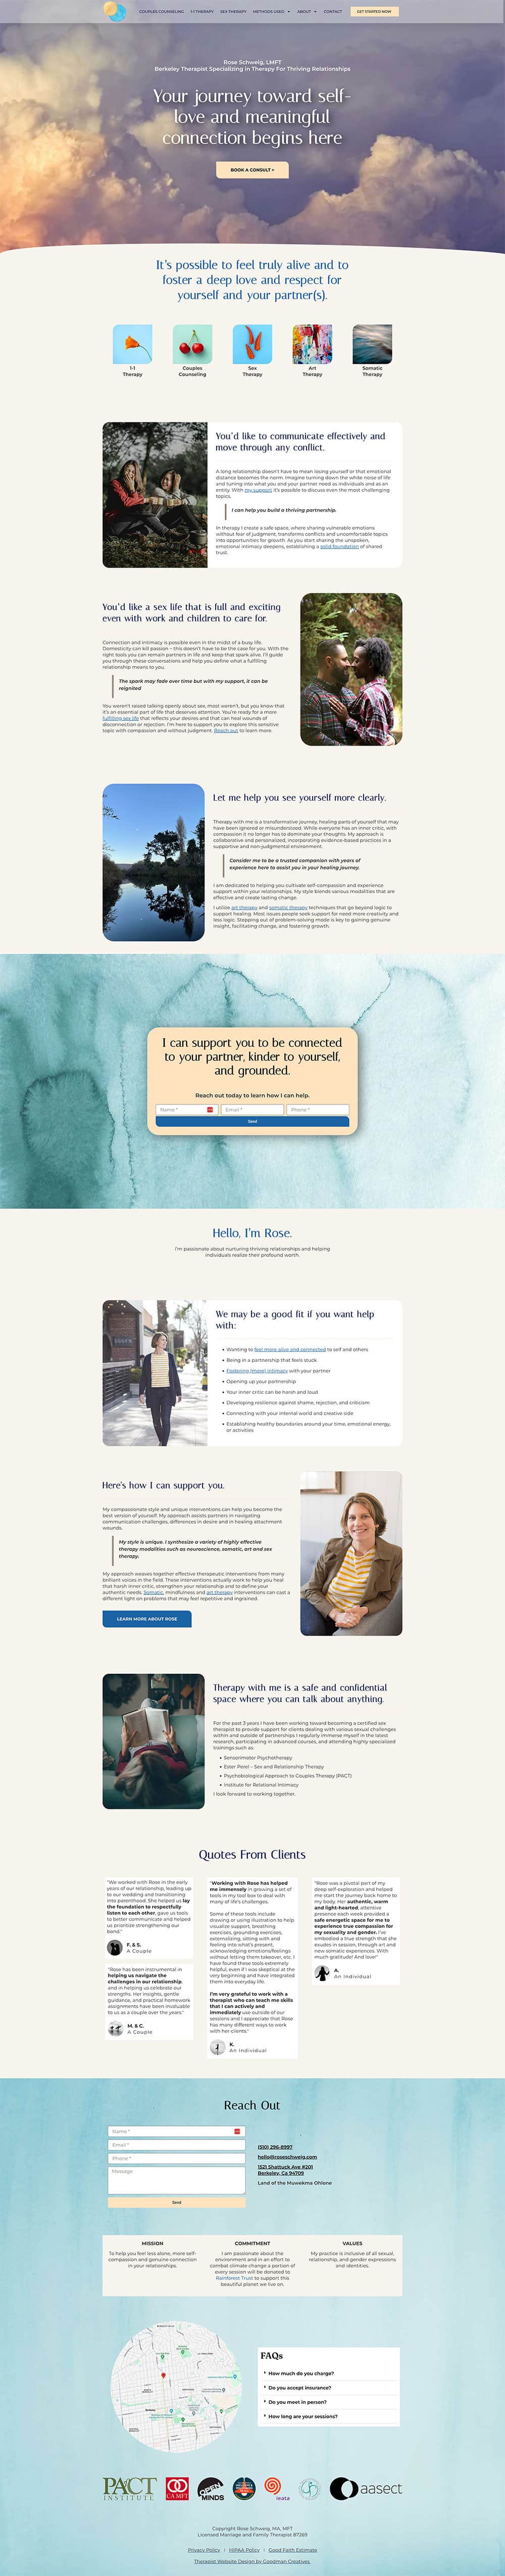 Couples counseling website design